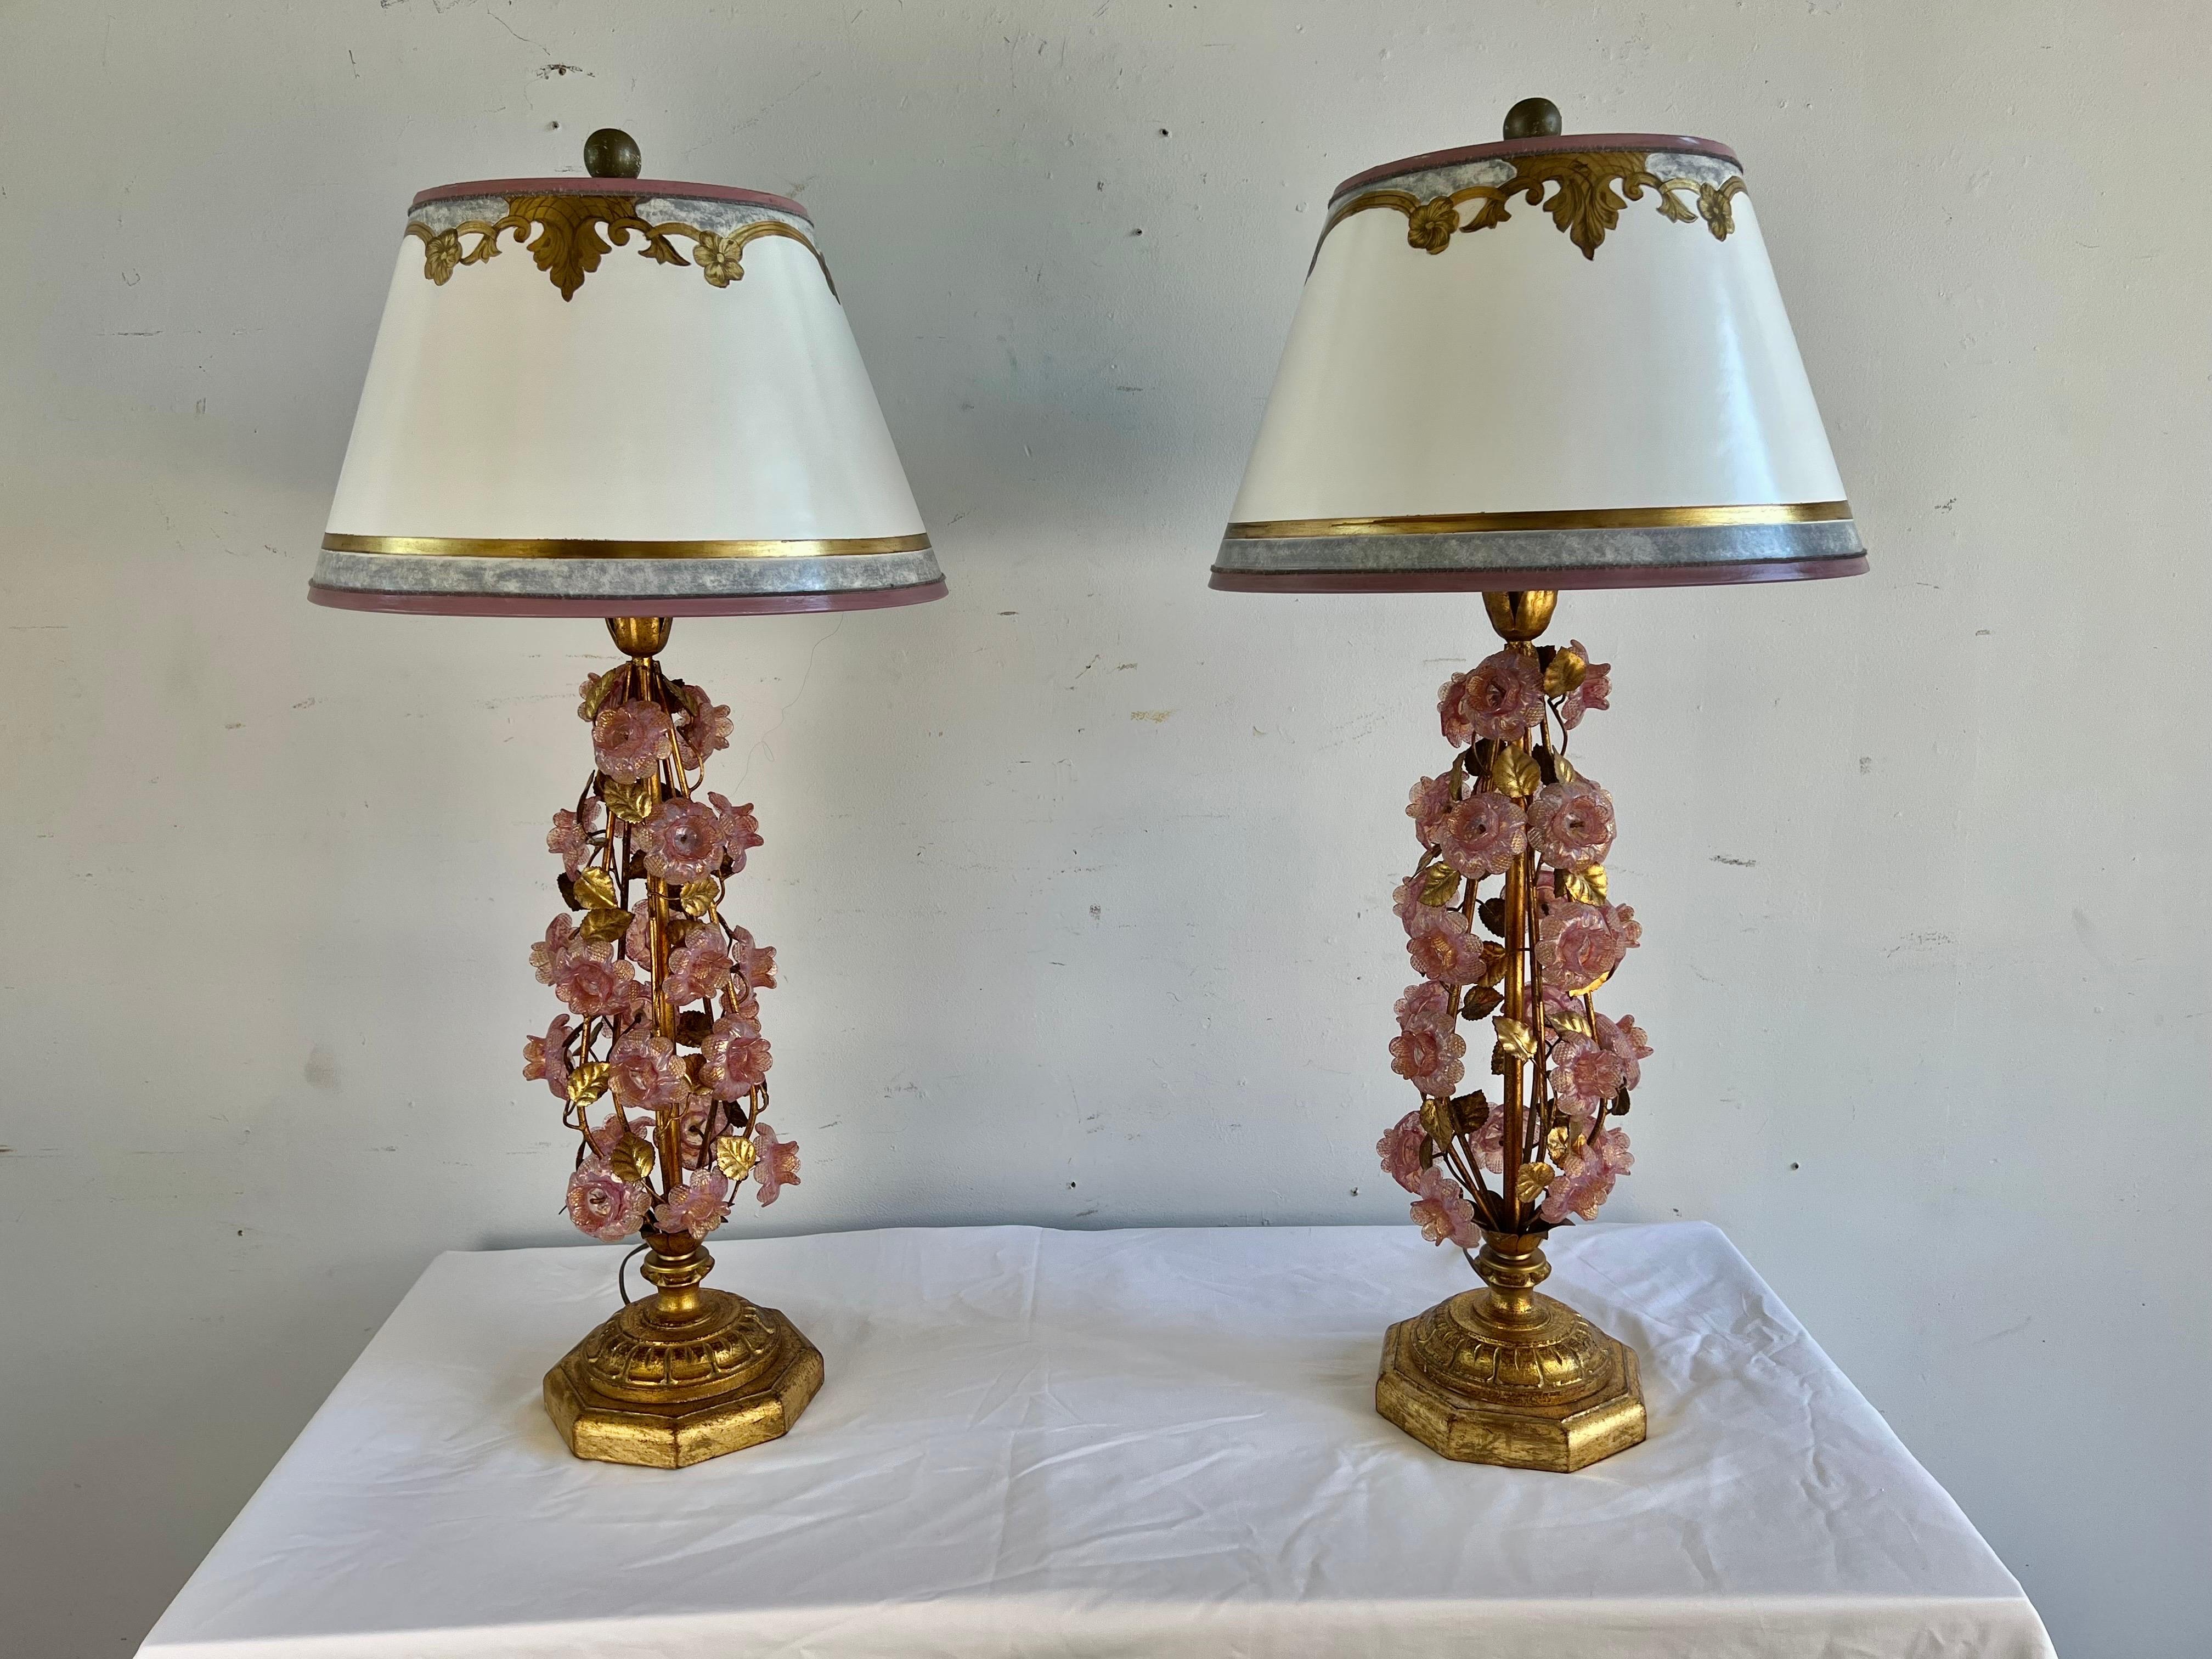 Pair of custom Murano Glass Lamps with pink hand blown flowers throughout. The lamps stands on octagonal shaped giltwood bases. The lamps are crowned with hand painted parchments shades. The lamps are wired and in working condition.